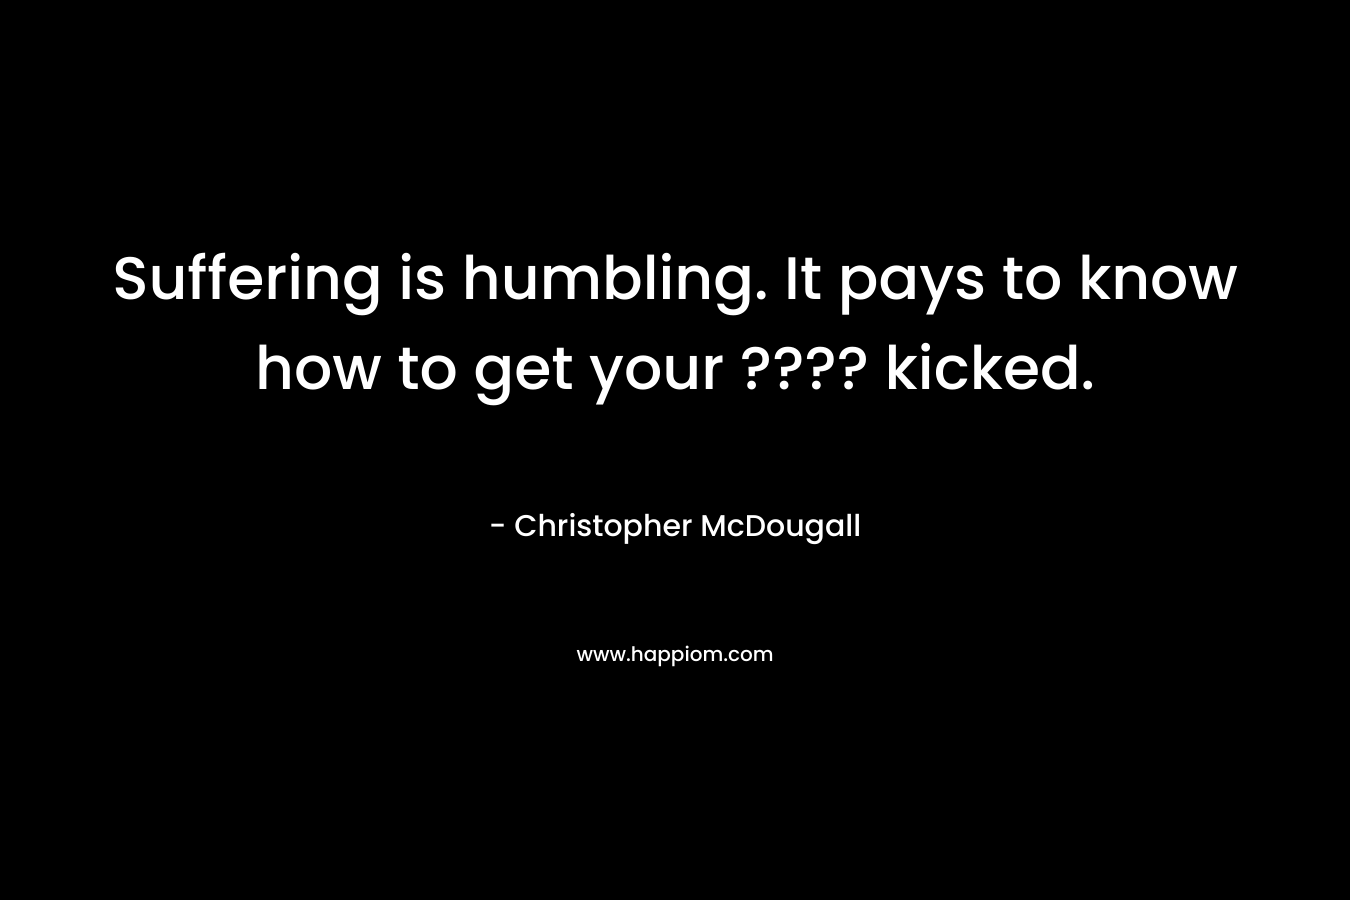 Suffering is humbling. It pays to know how to get your ???? kicked.